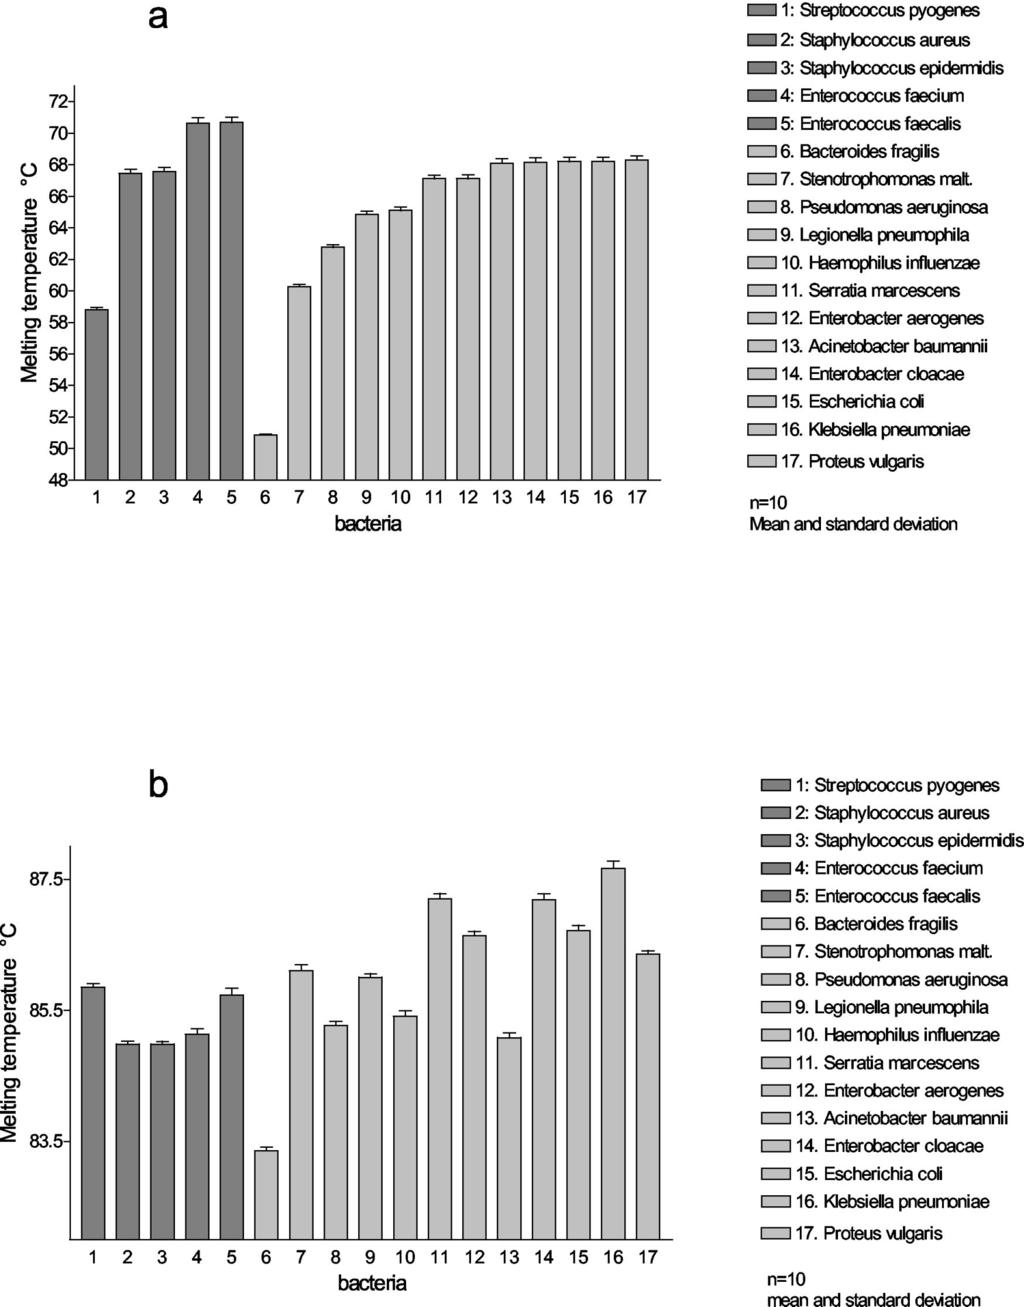 VOL. 42, 2004 DETECTION OF BACTERIAL DNA IN PREPARED SPECIMENS 515 FIG. 3.